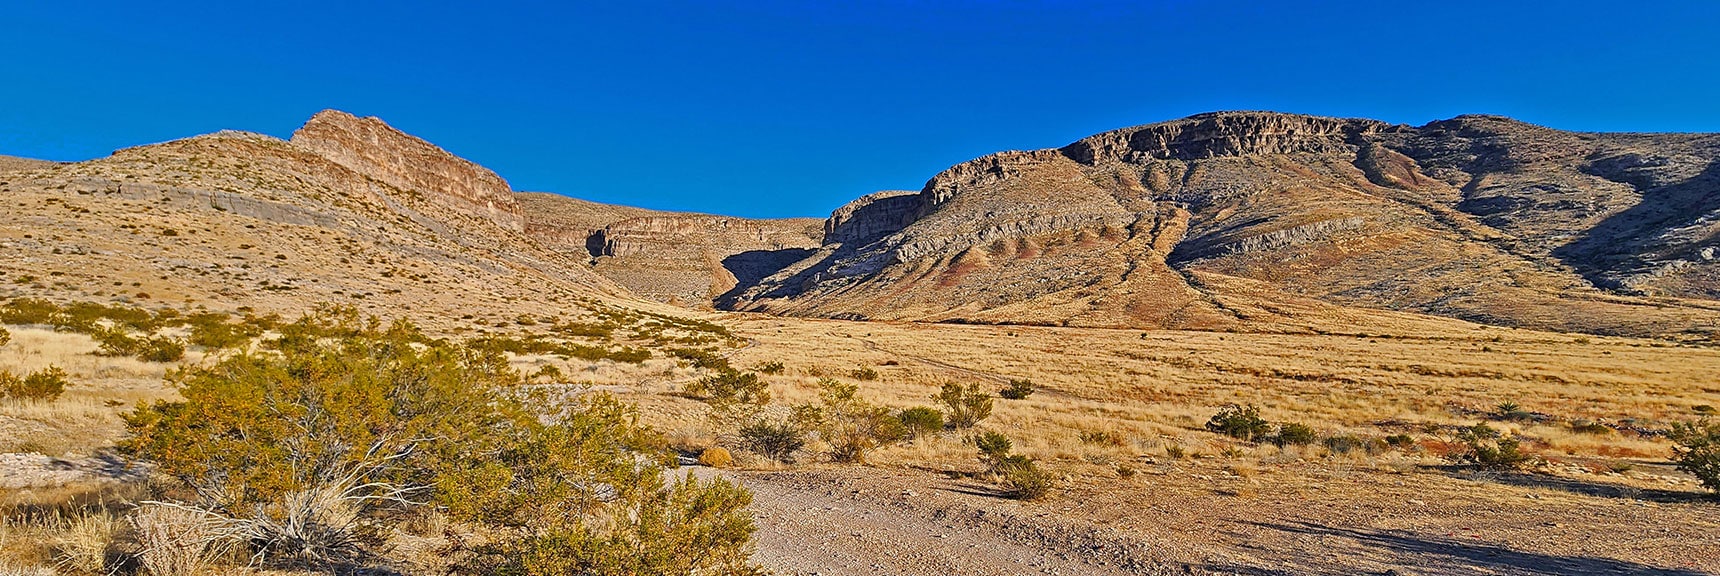 1st & 2nd Westside Canyons: Cave Canyon (right), Mule Spring Canyon (left) | Landmark Bluff Summit | Lovell Canyon, Nevada